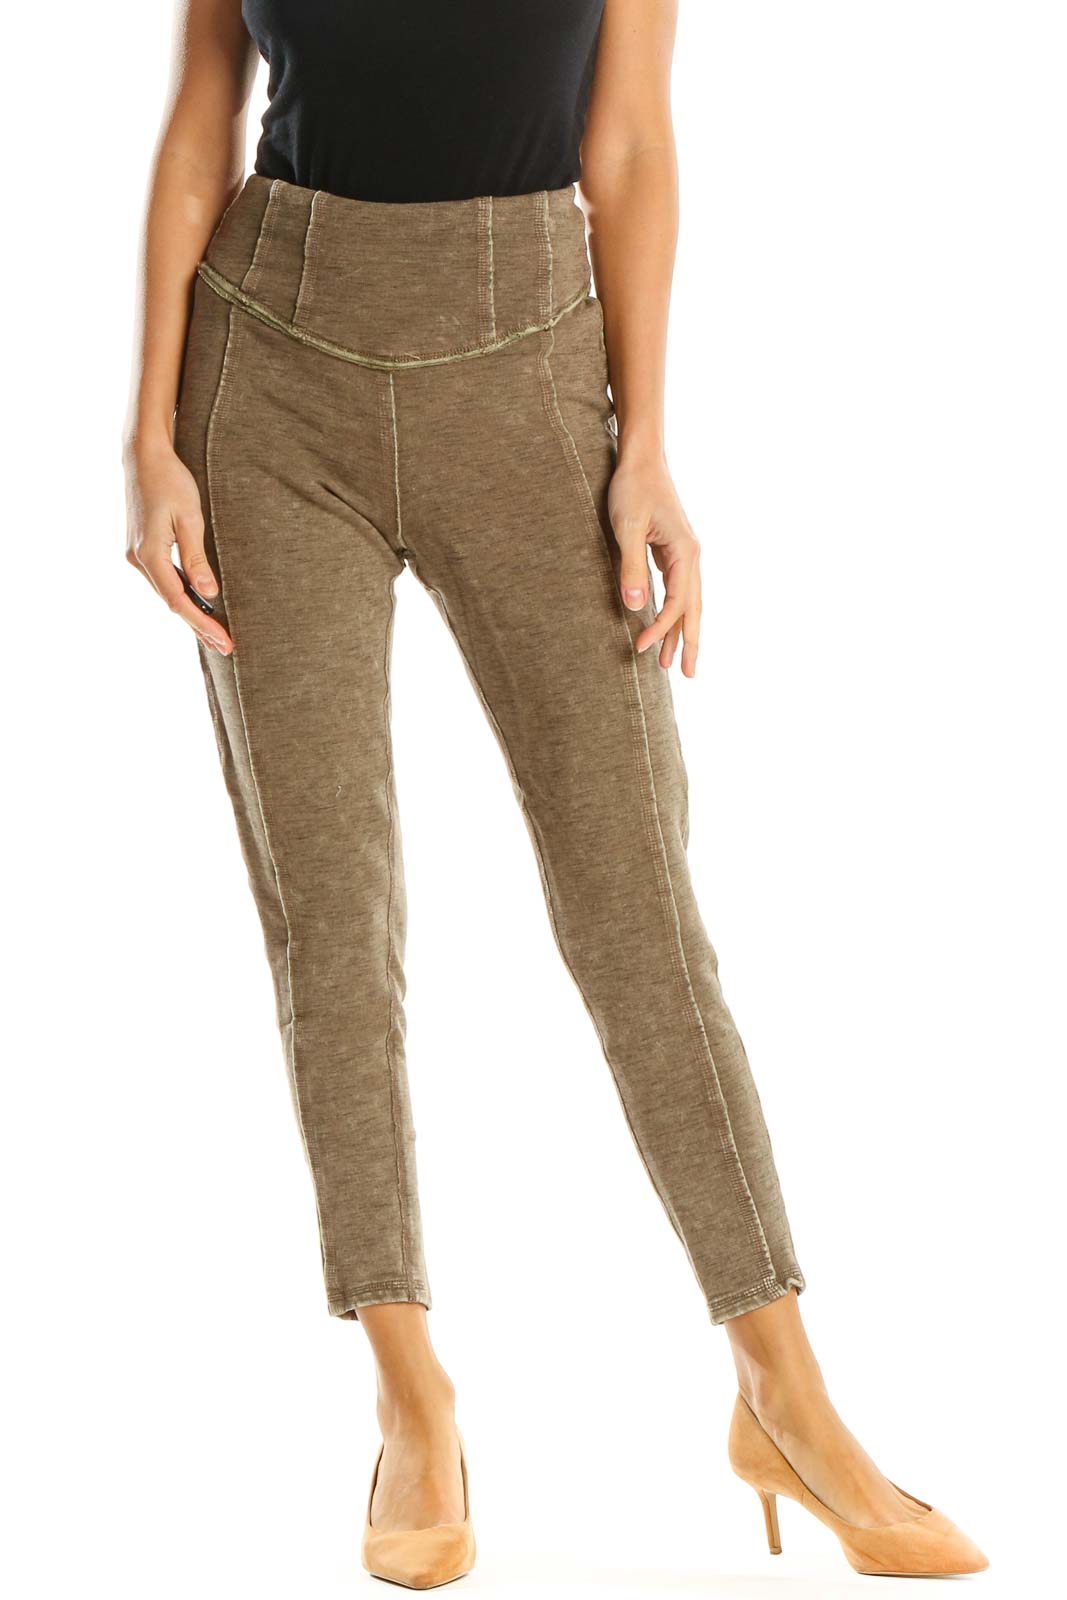 Brown Textured Casual Leggings Front